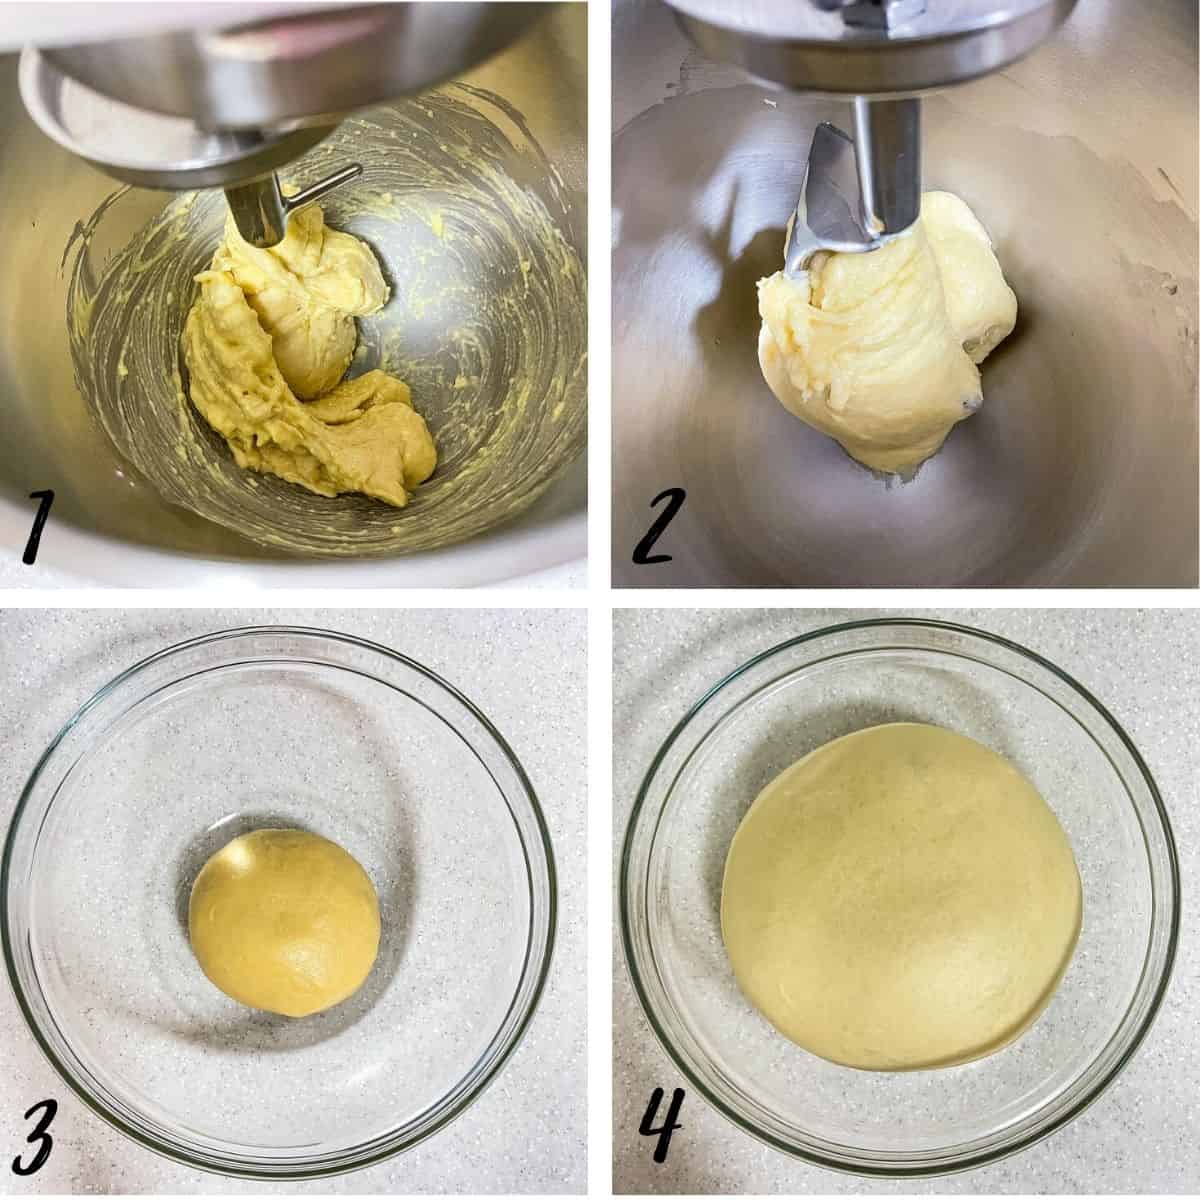 A poster of 4 images showing how to proof dough